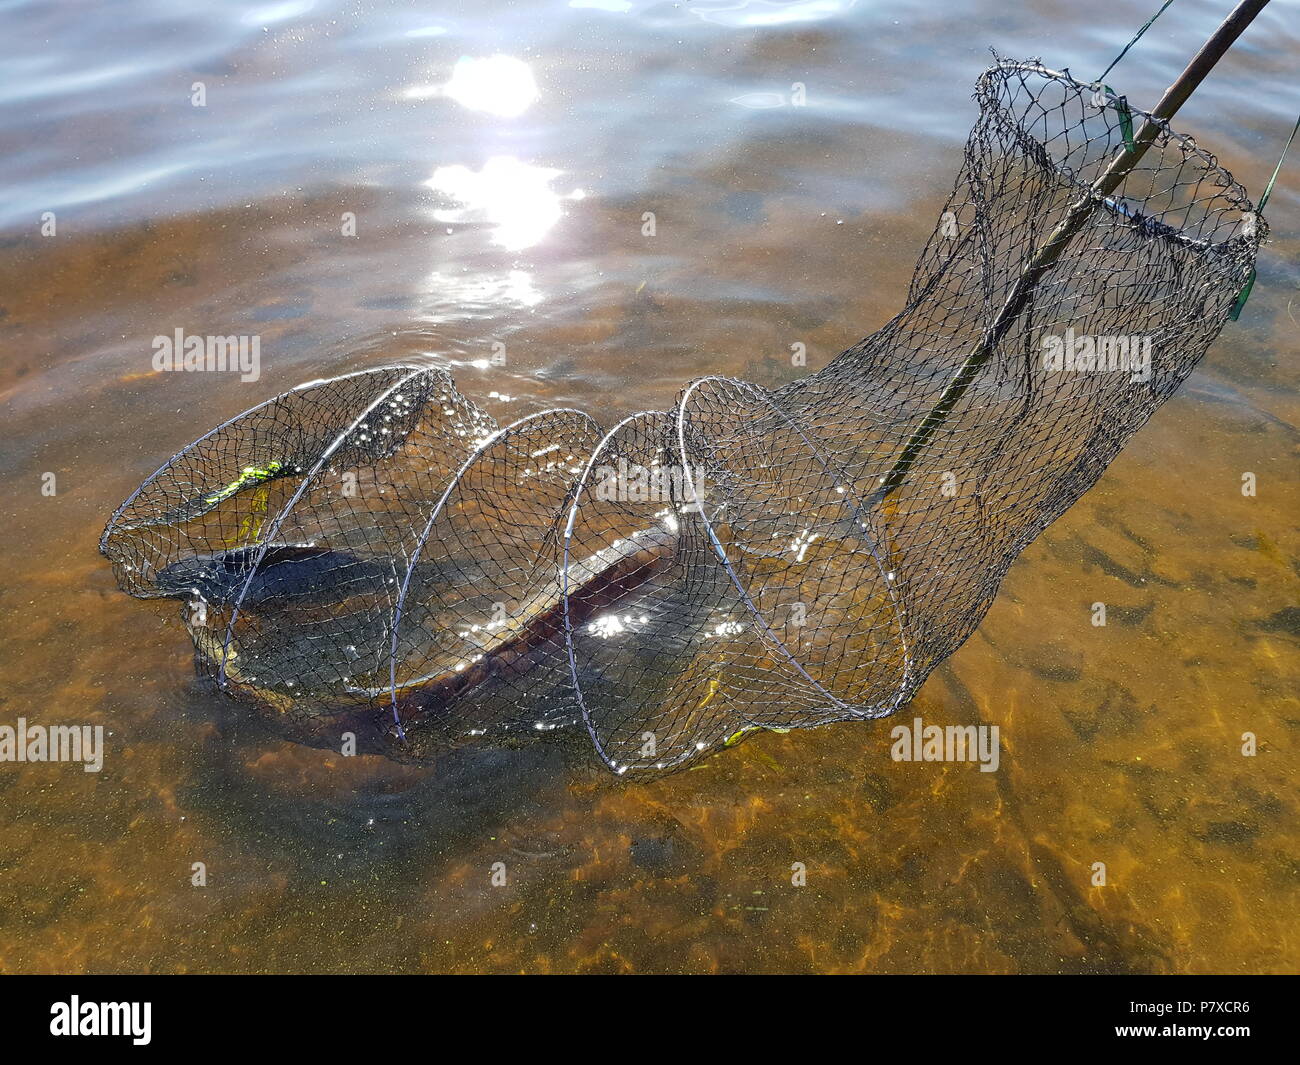 https://c8.alamy.com/comp/P7XCR6/caught-fish-in-the-cage-in-the-river-sport-fishing-feeder-fishing-P7XCR6.jpg